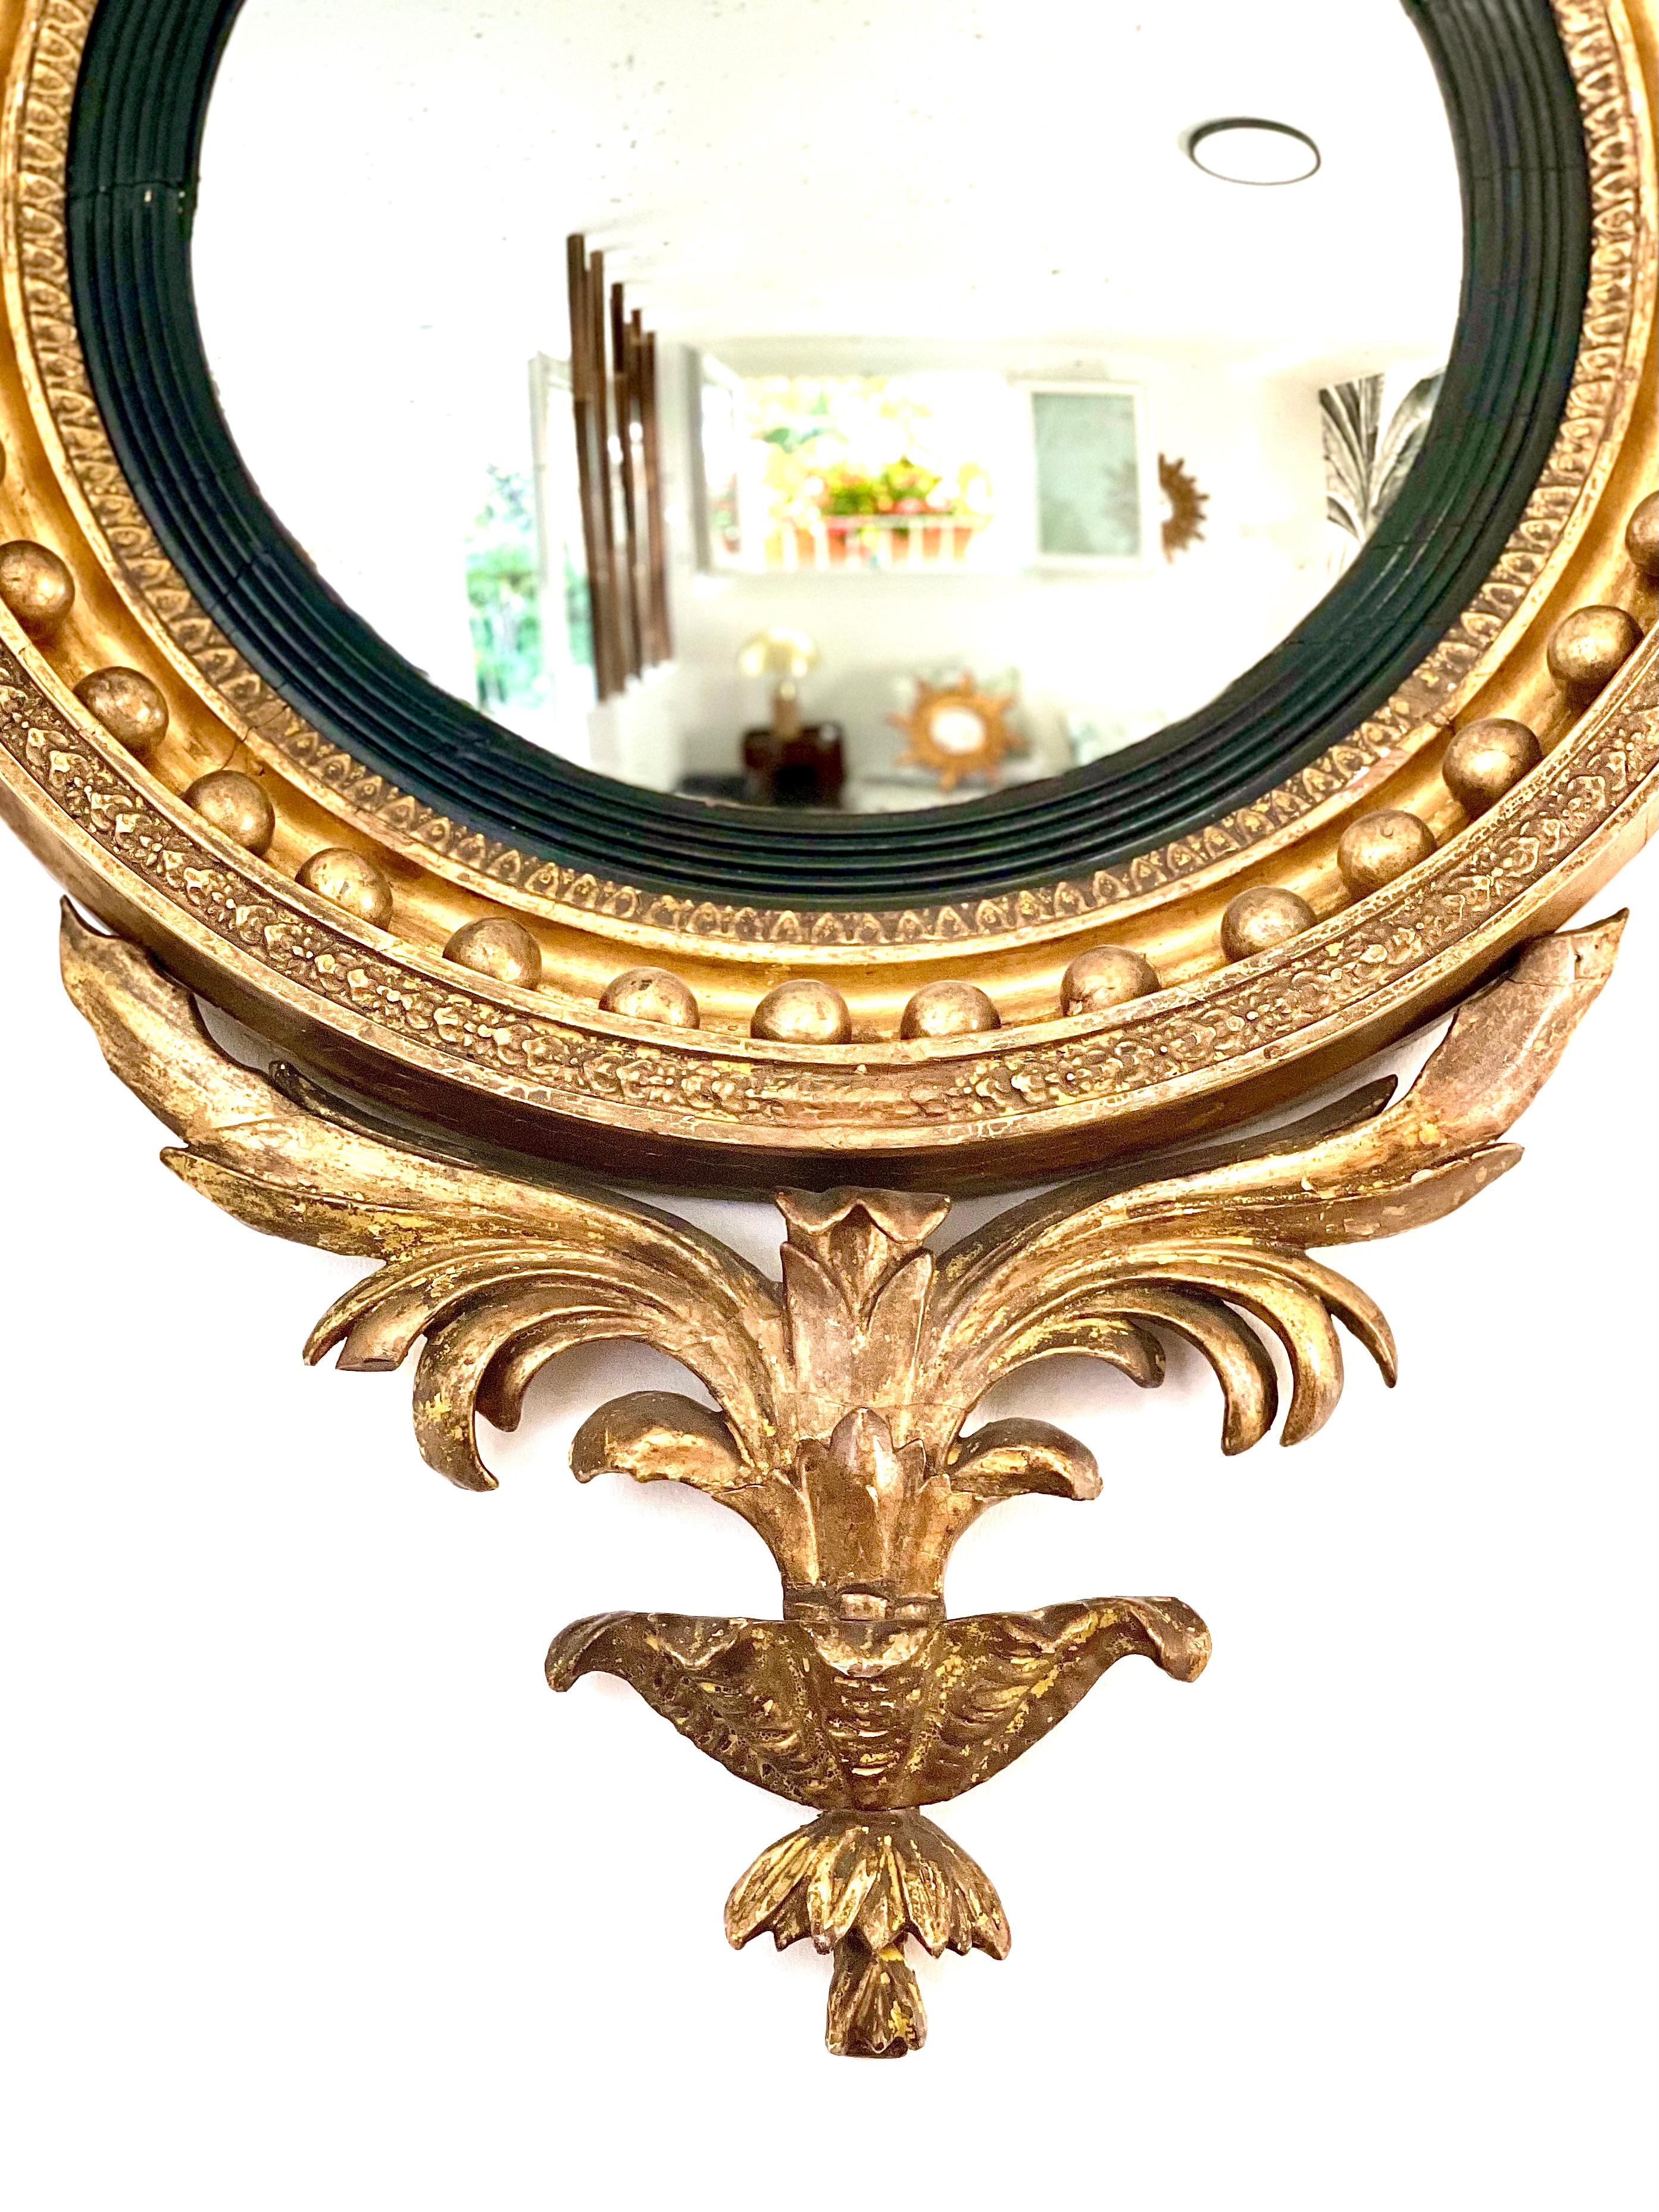 This very fine Regency convex mirror is dating from the early 19th century, it is made of giltwood and blackened stucco. This exceptional and rare Regency mirror is topped with a giltwood eagle with outstretched wings, flanked on each side by